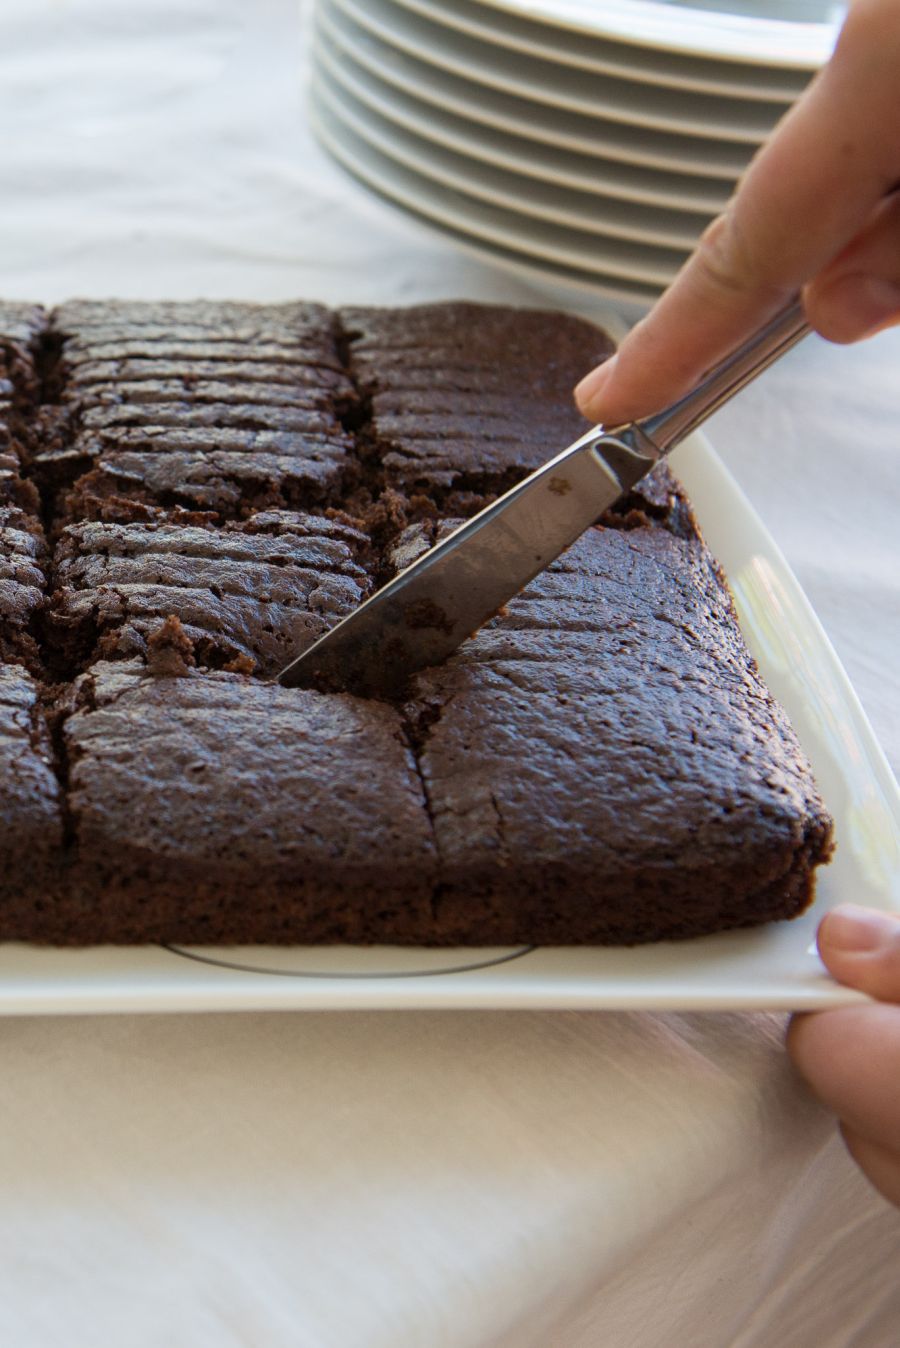 Carving up the Coca-Cola brownies